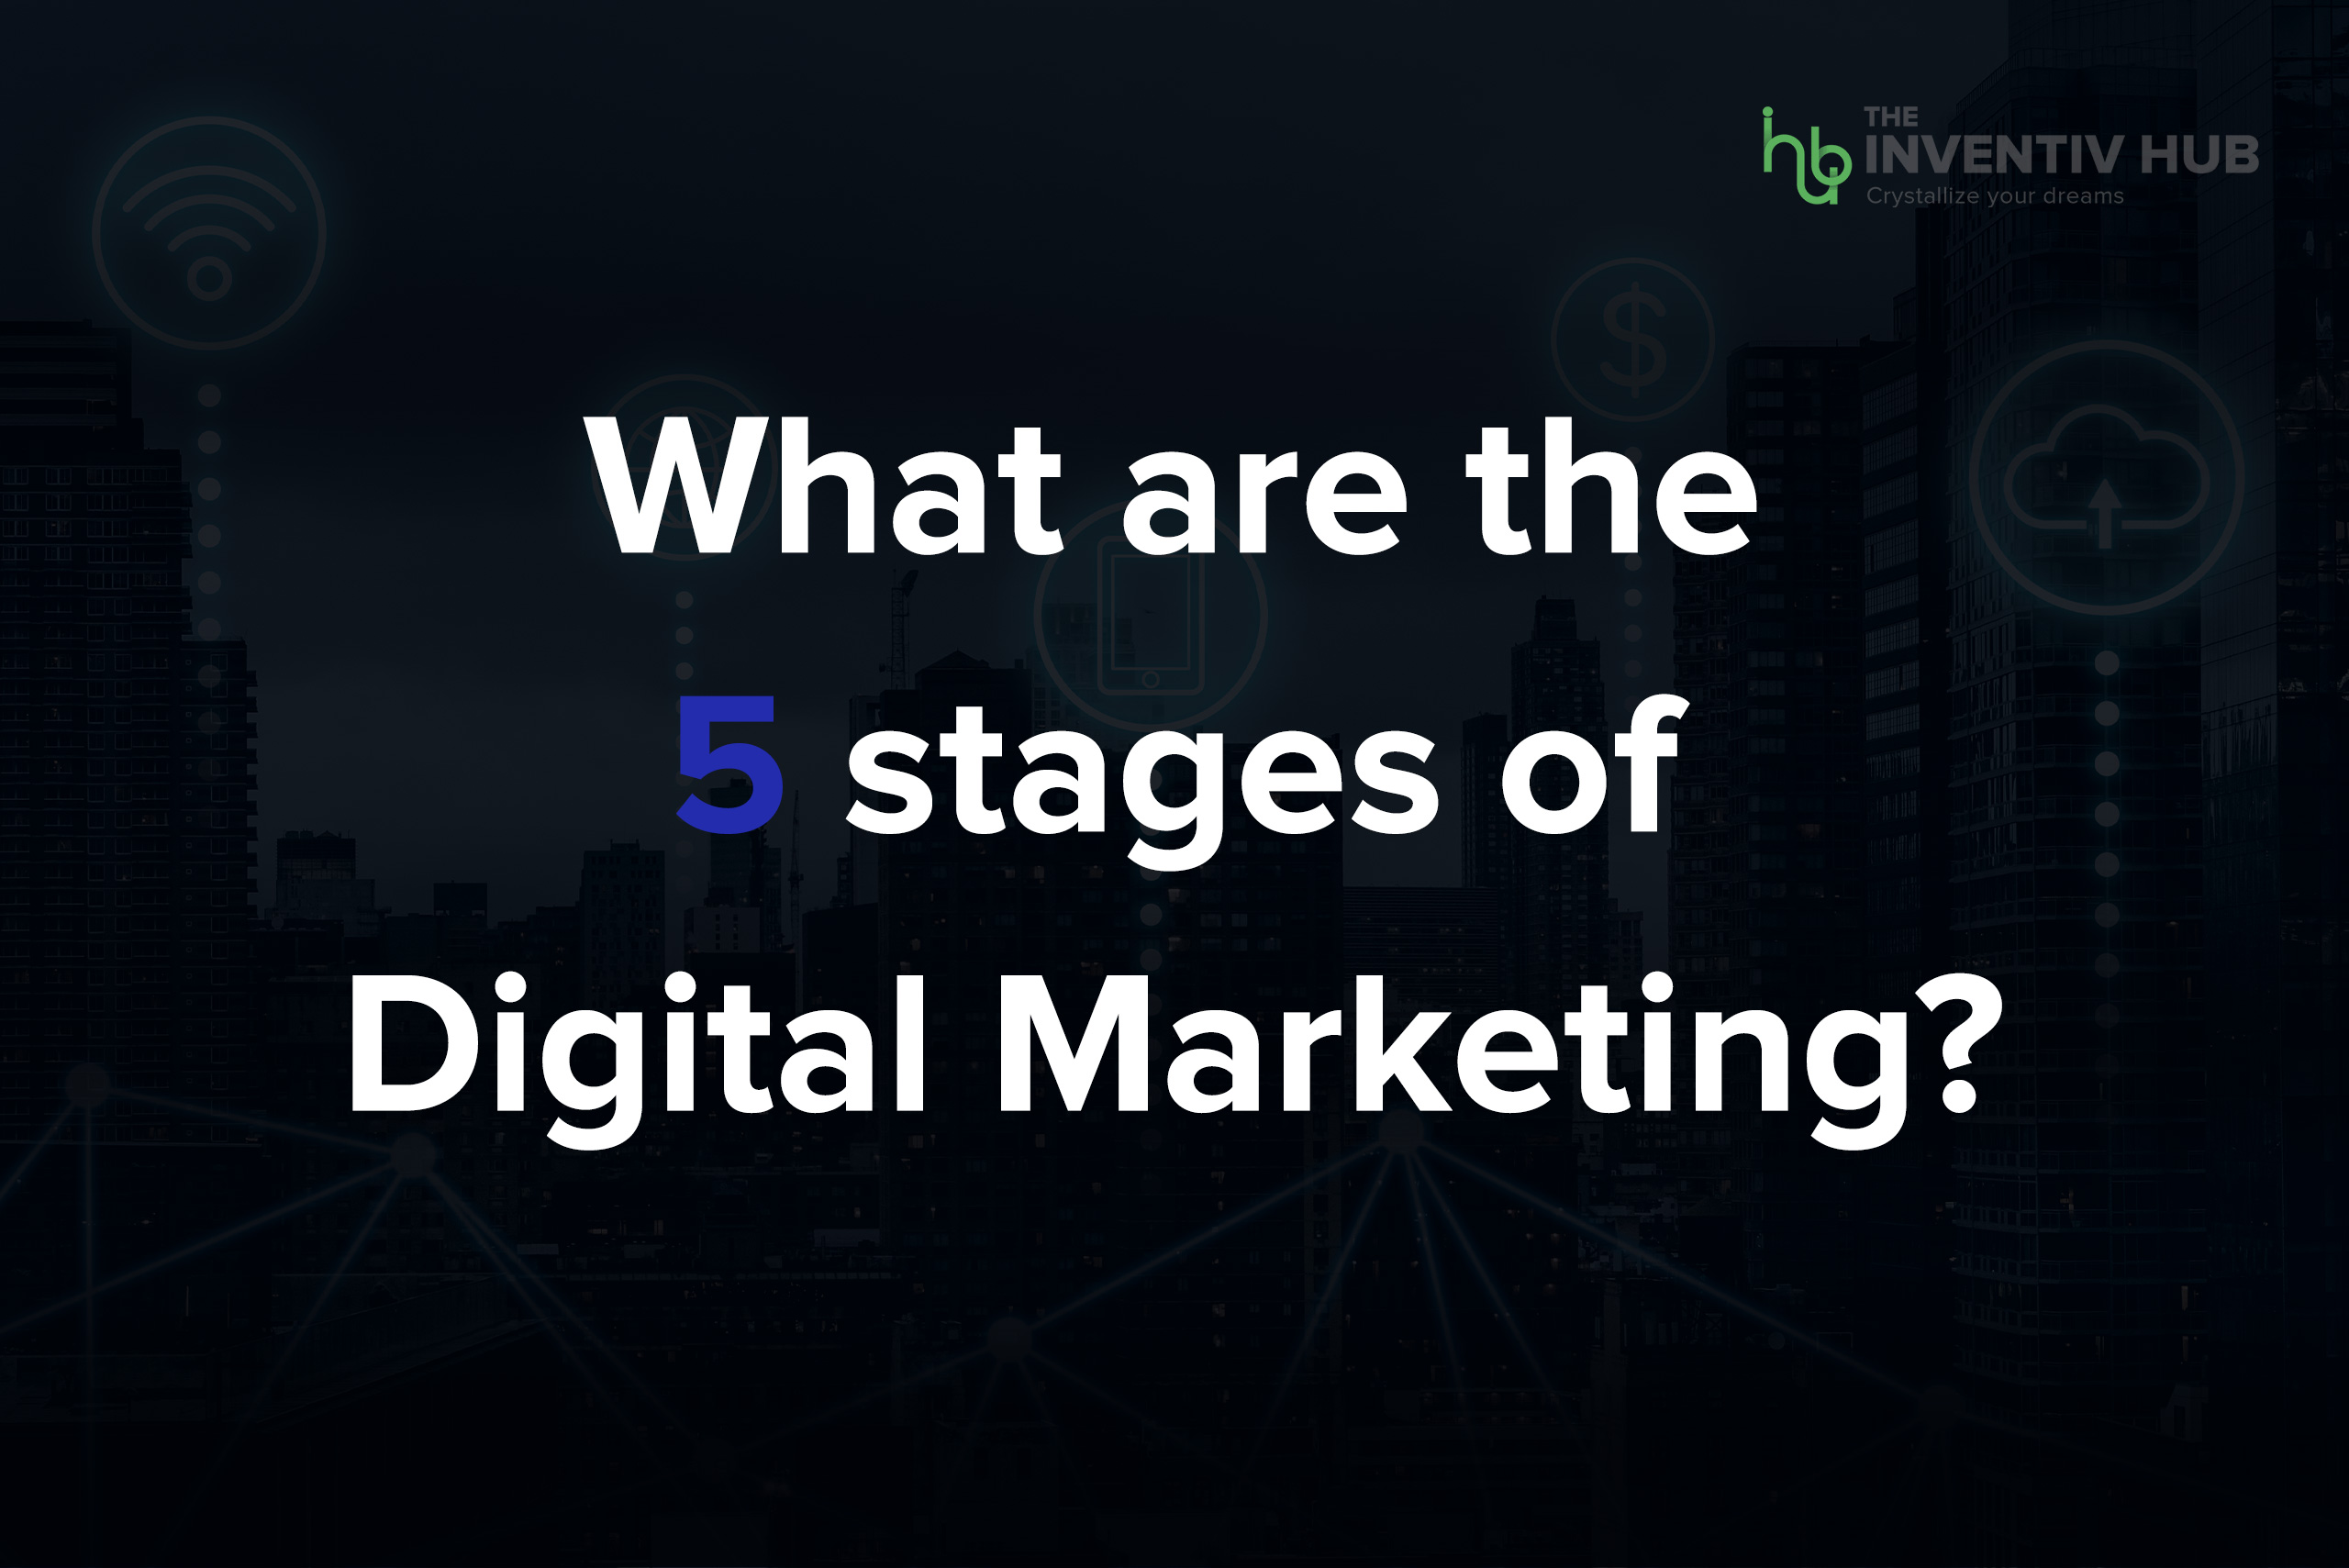 What are the 5 stages of digital marketing?